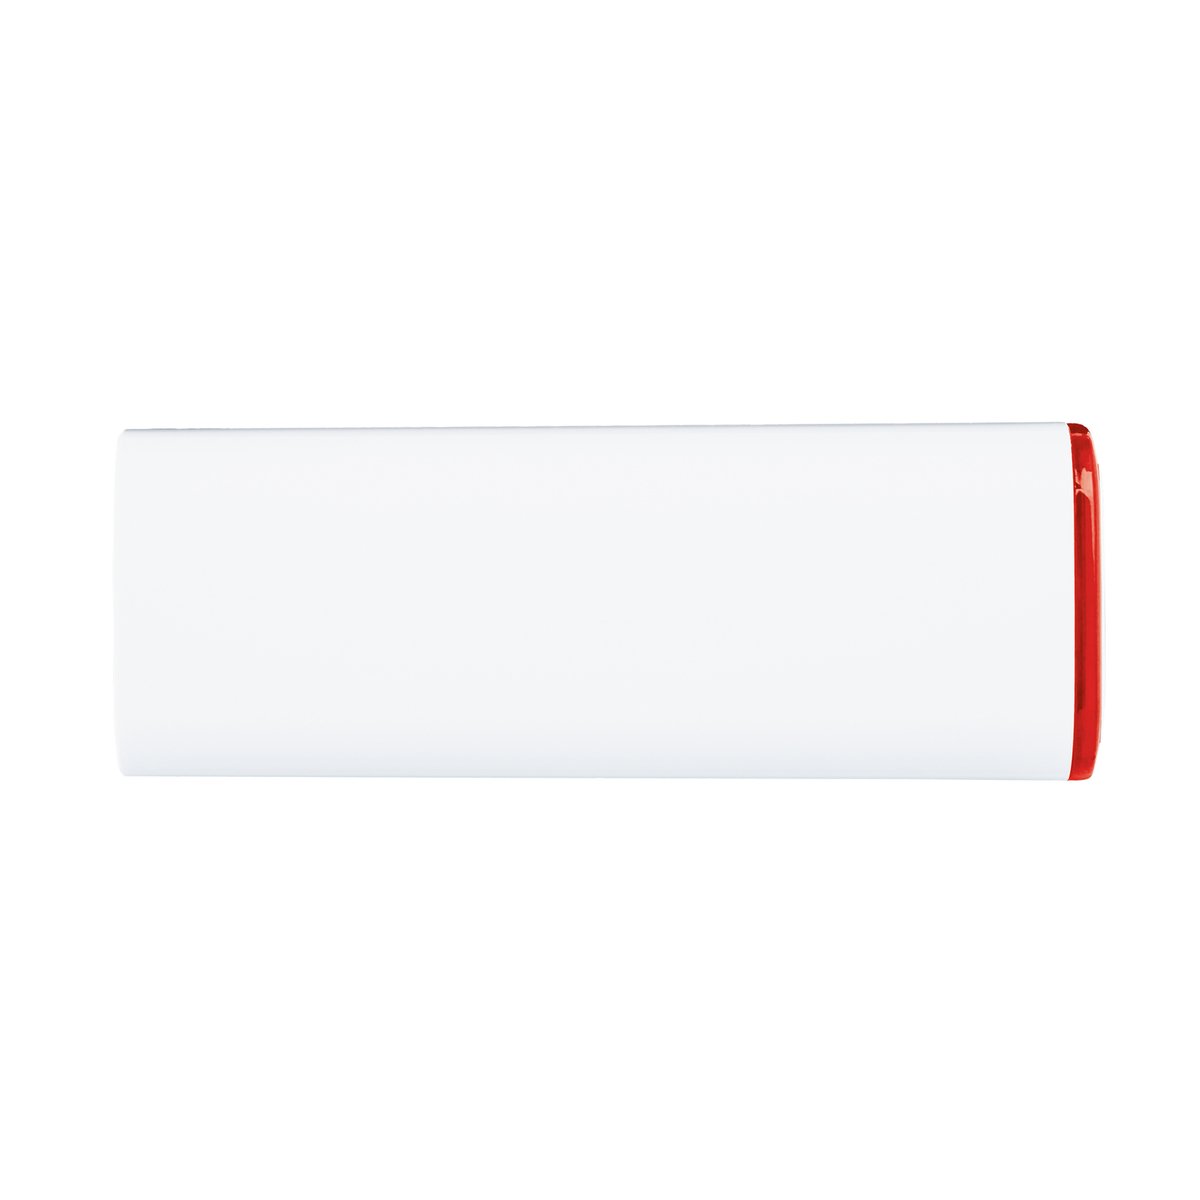 Powerbank COLLECTION 500 red